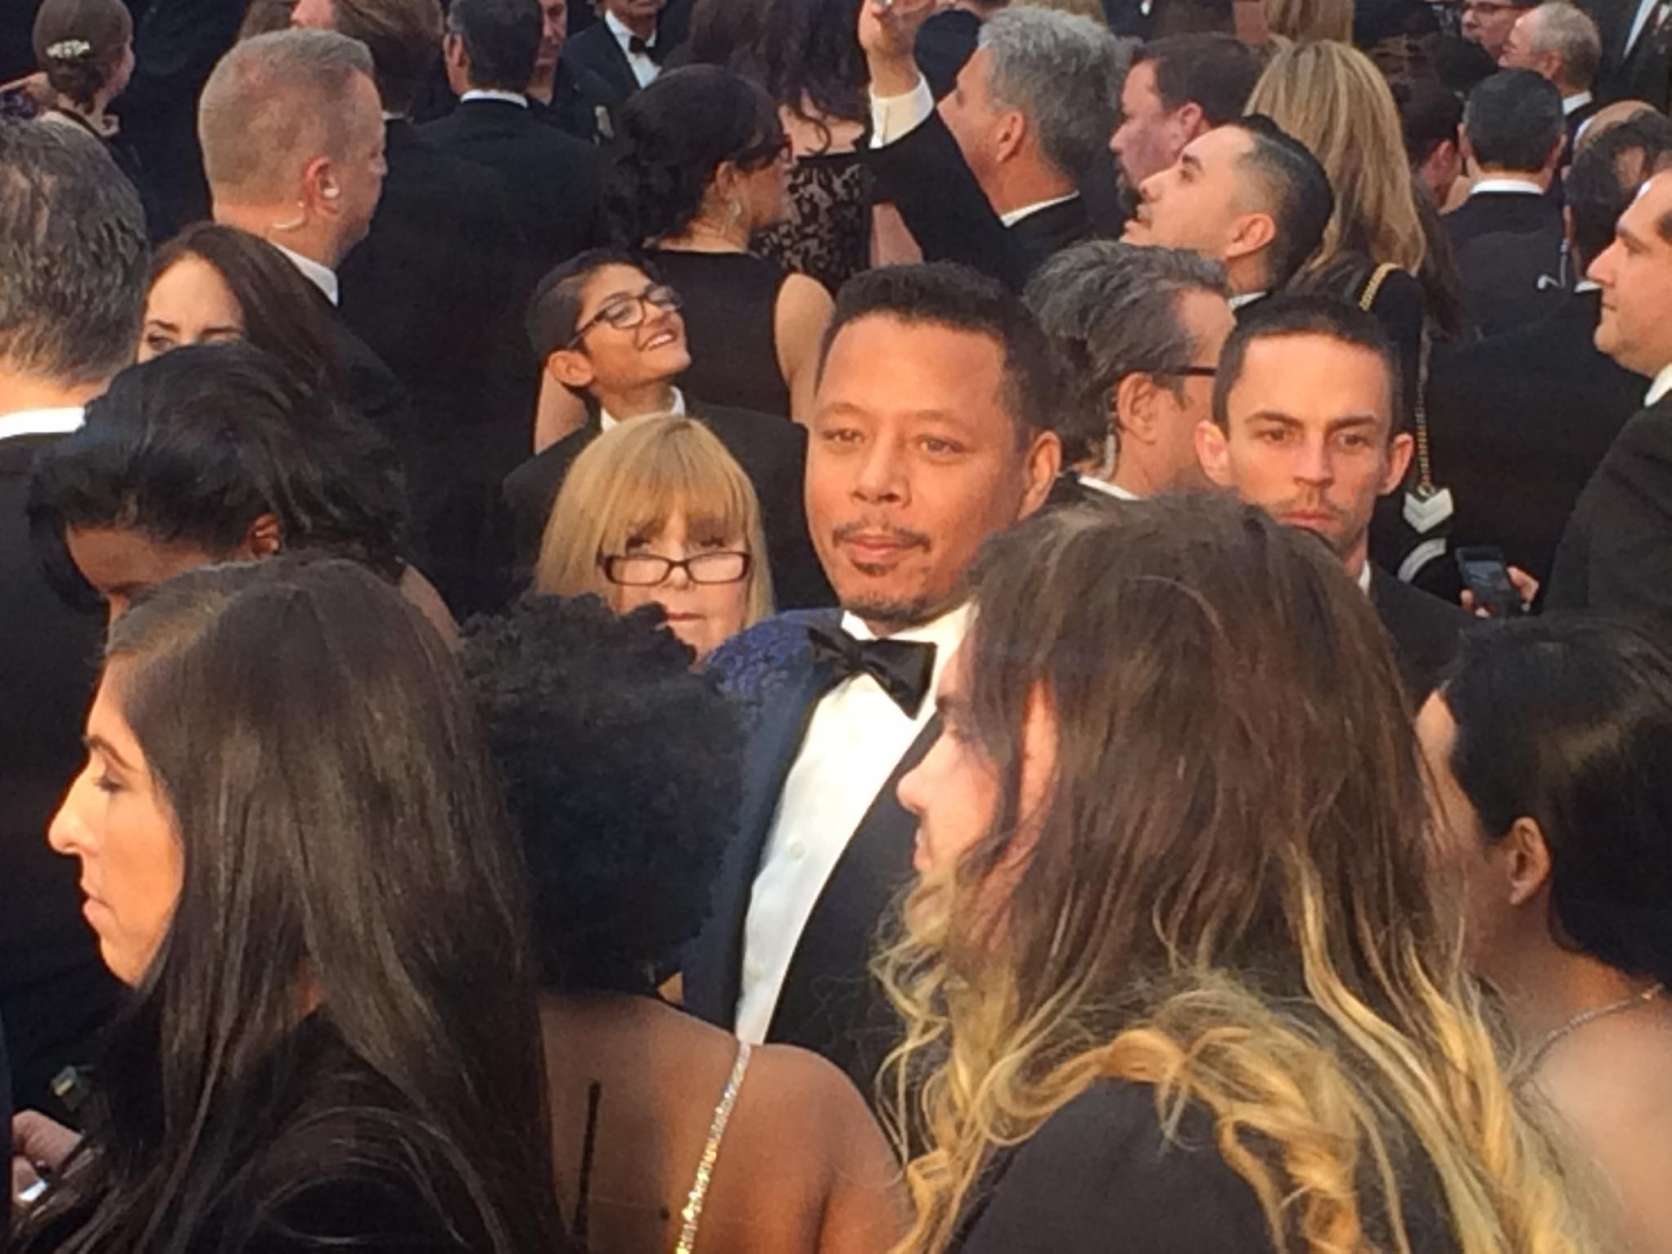 Terrence Howard in the crowd at the 89th annual Academy Awards. (WTOP/Jason Fraley)